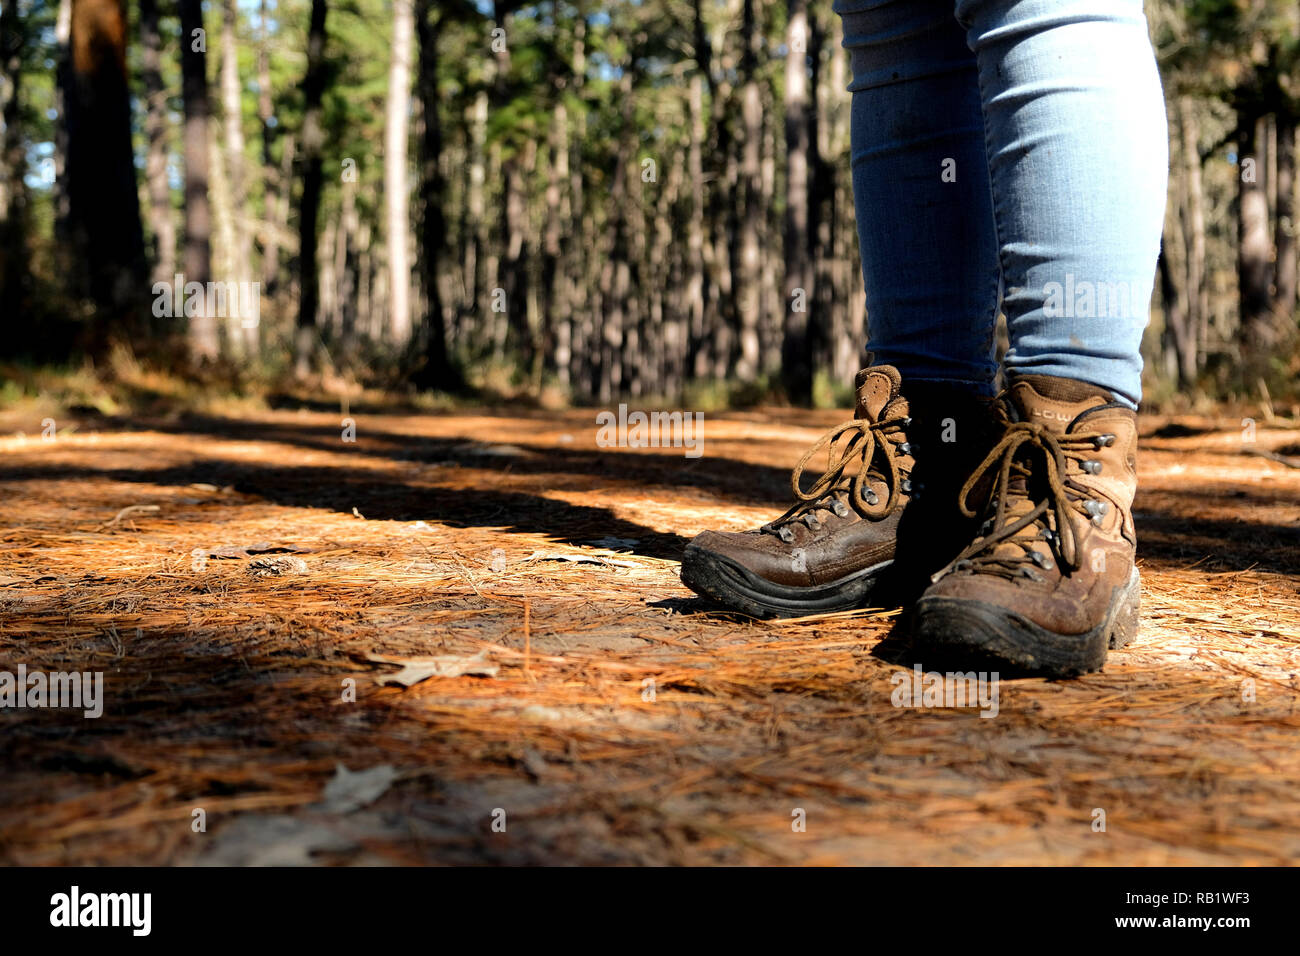 legs wearing jeans and hiking boots 